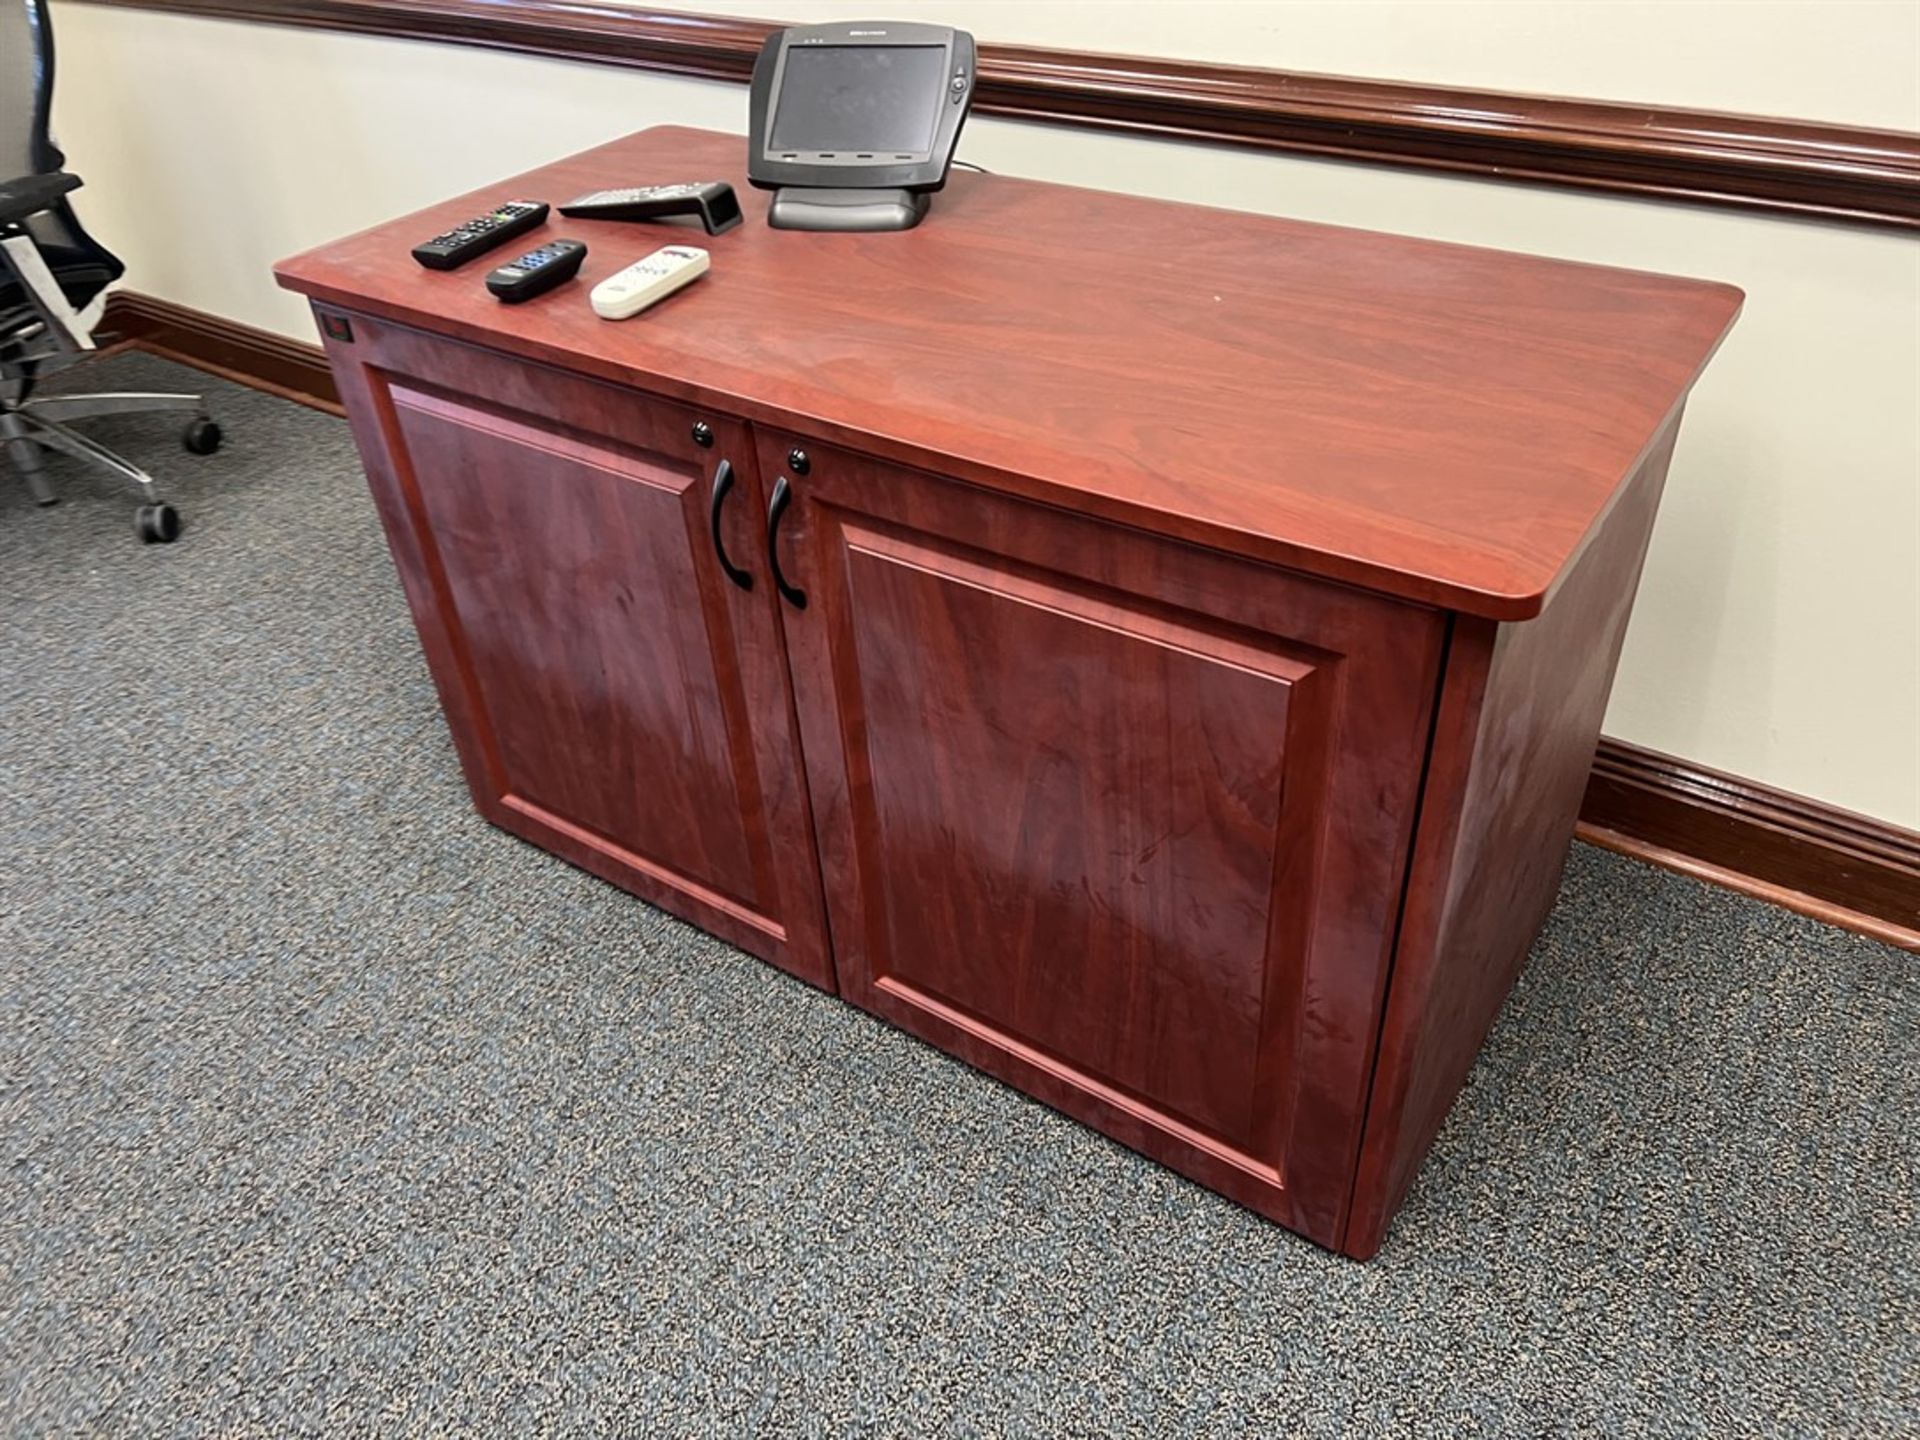 Contents of Office, Approx. 15' x 4' Conference Table, Side Table, Credenza (BUILDING 32) - Image 2 of 3